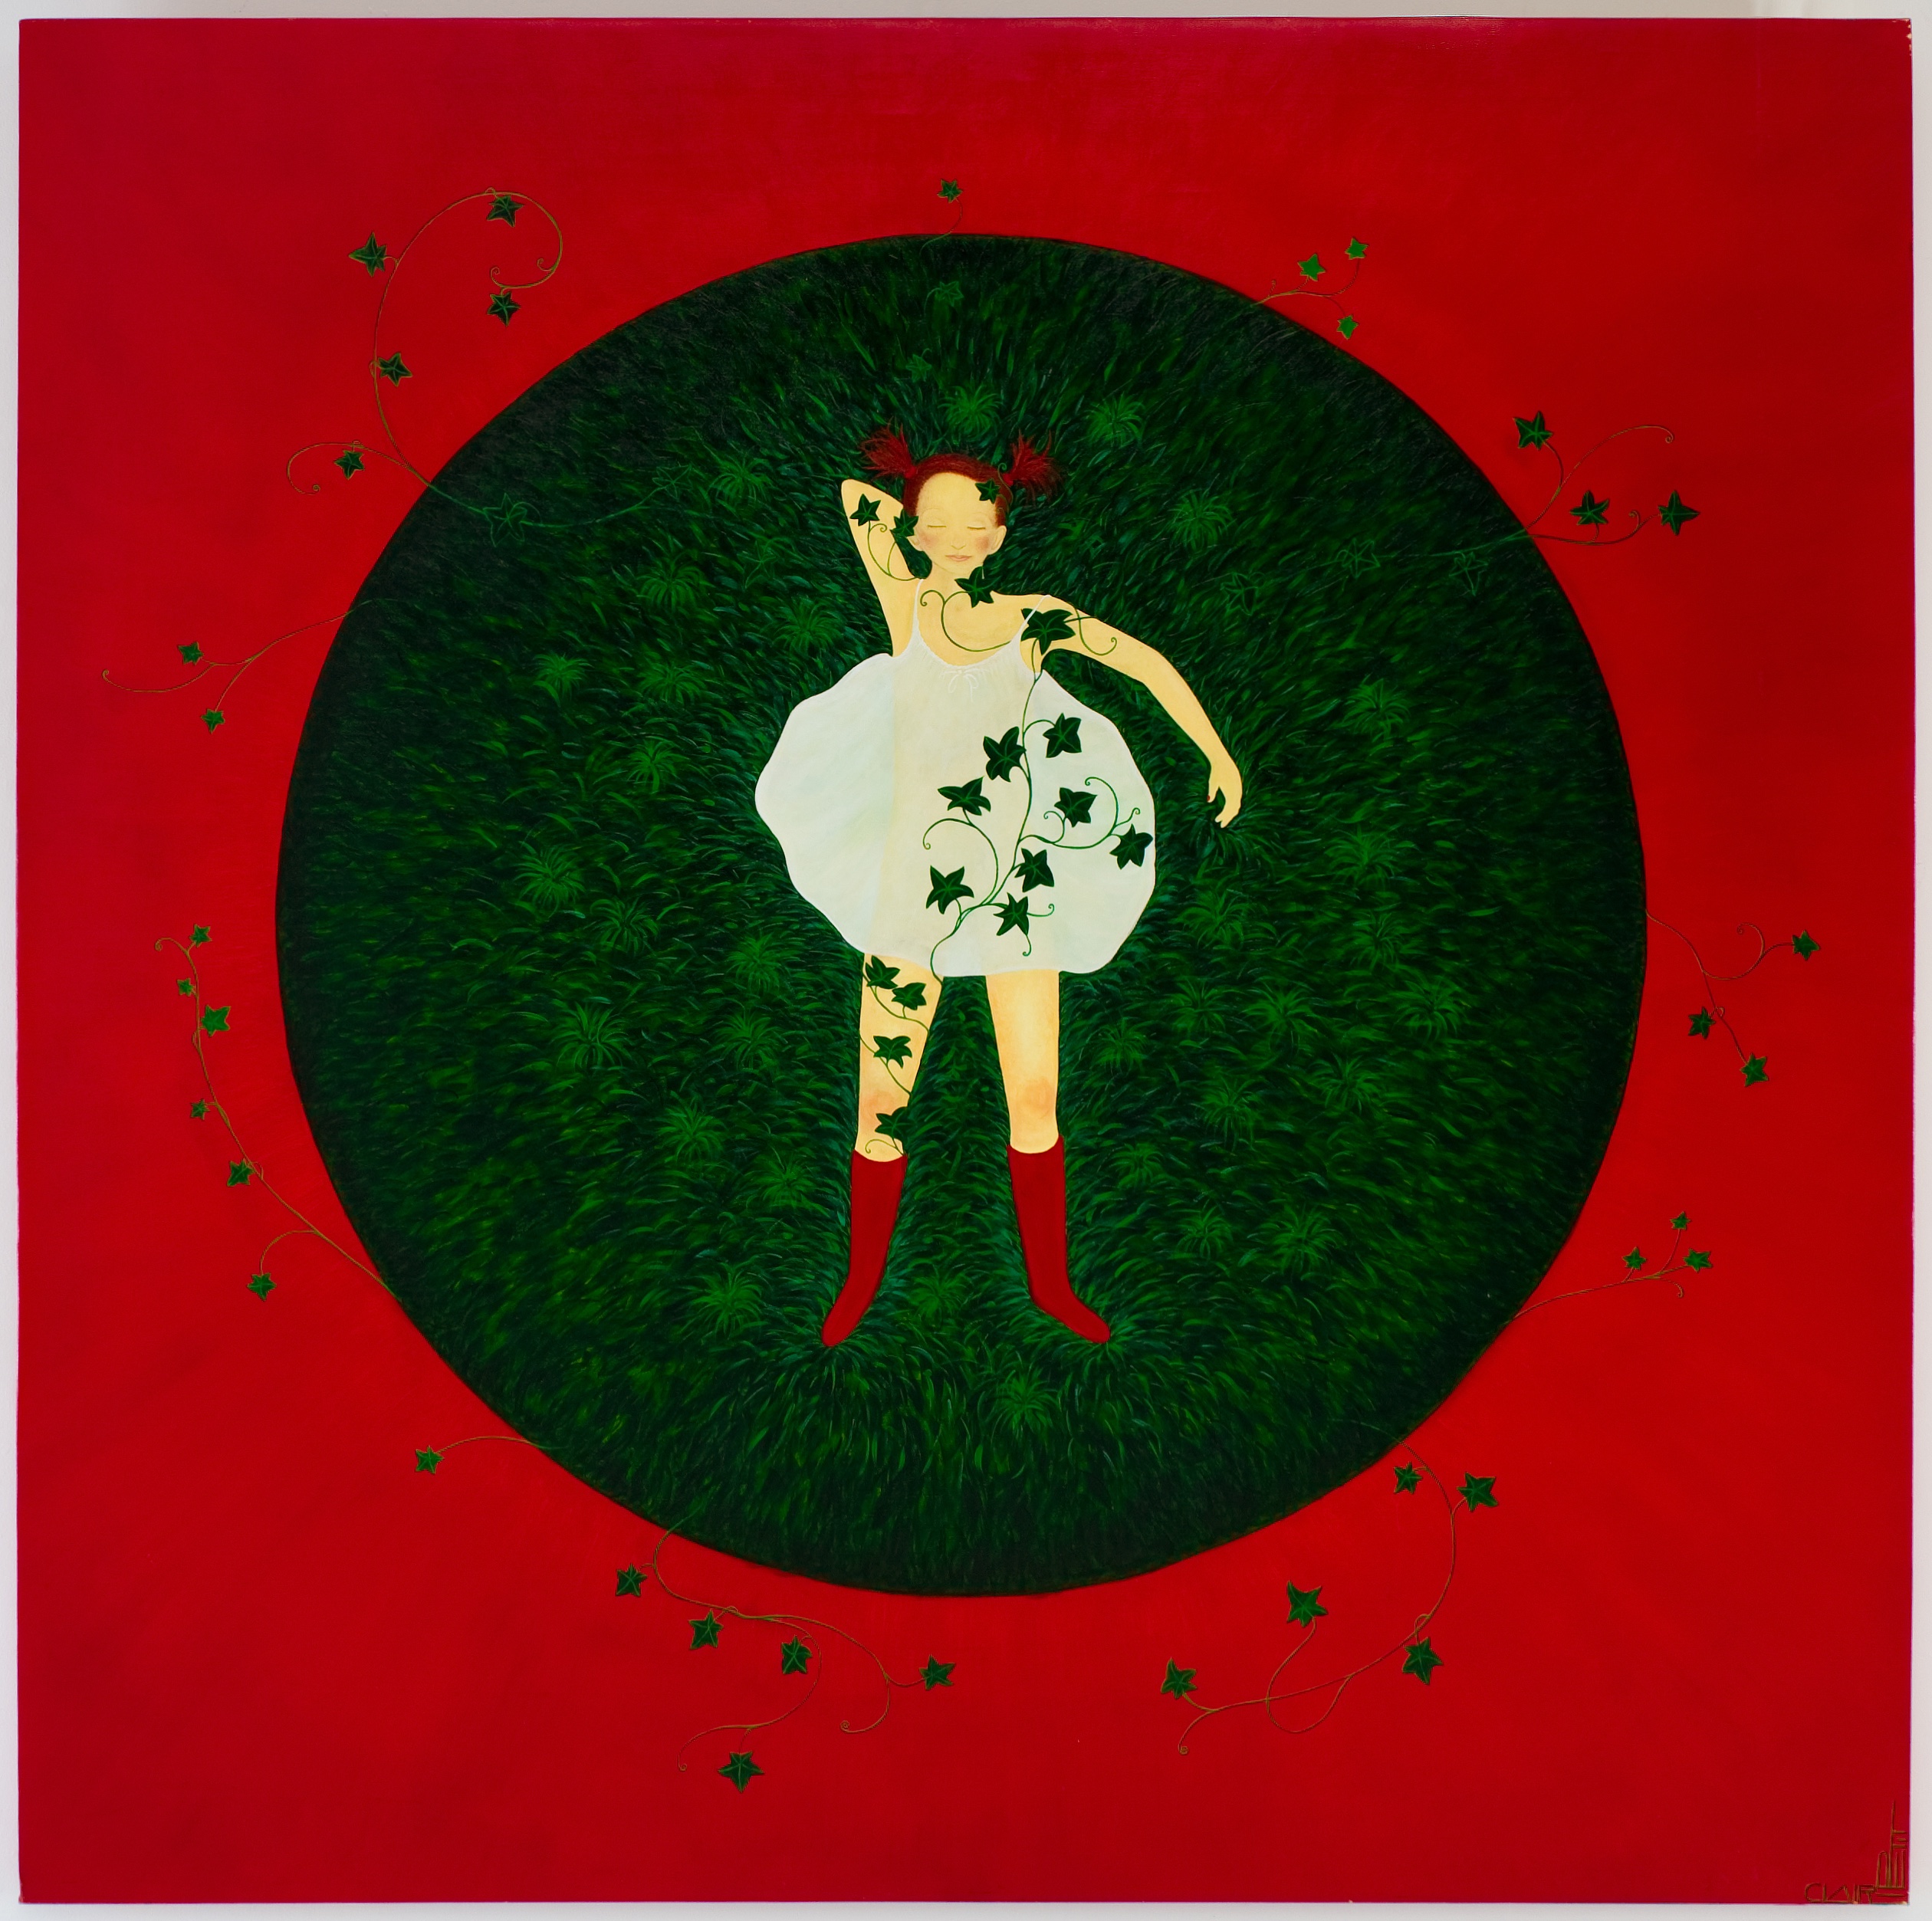 Claire Petit; Awaiting Unconsciousness, 2011, Original Painting Oil, 160 x 160 cm. Artwork description: 241 Oil Painting on canvas.  A little girl is sleeping in a green circle.  A climbing ivy is growing on her leg.  The background is a vivid red.A limited deluxe art print is available as well, signed and numbered reproduction 24 x 24 comes with a Certificate ...